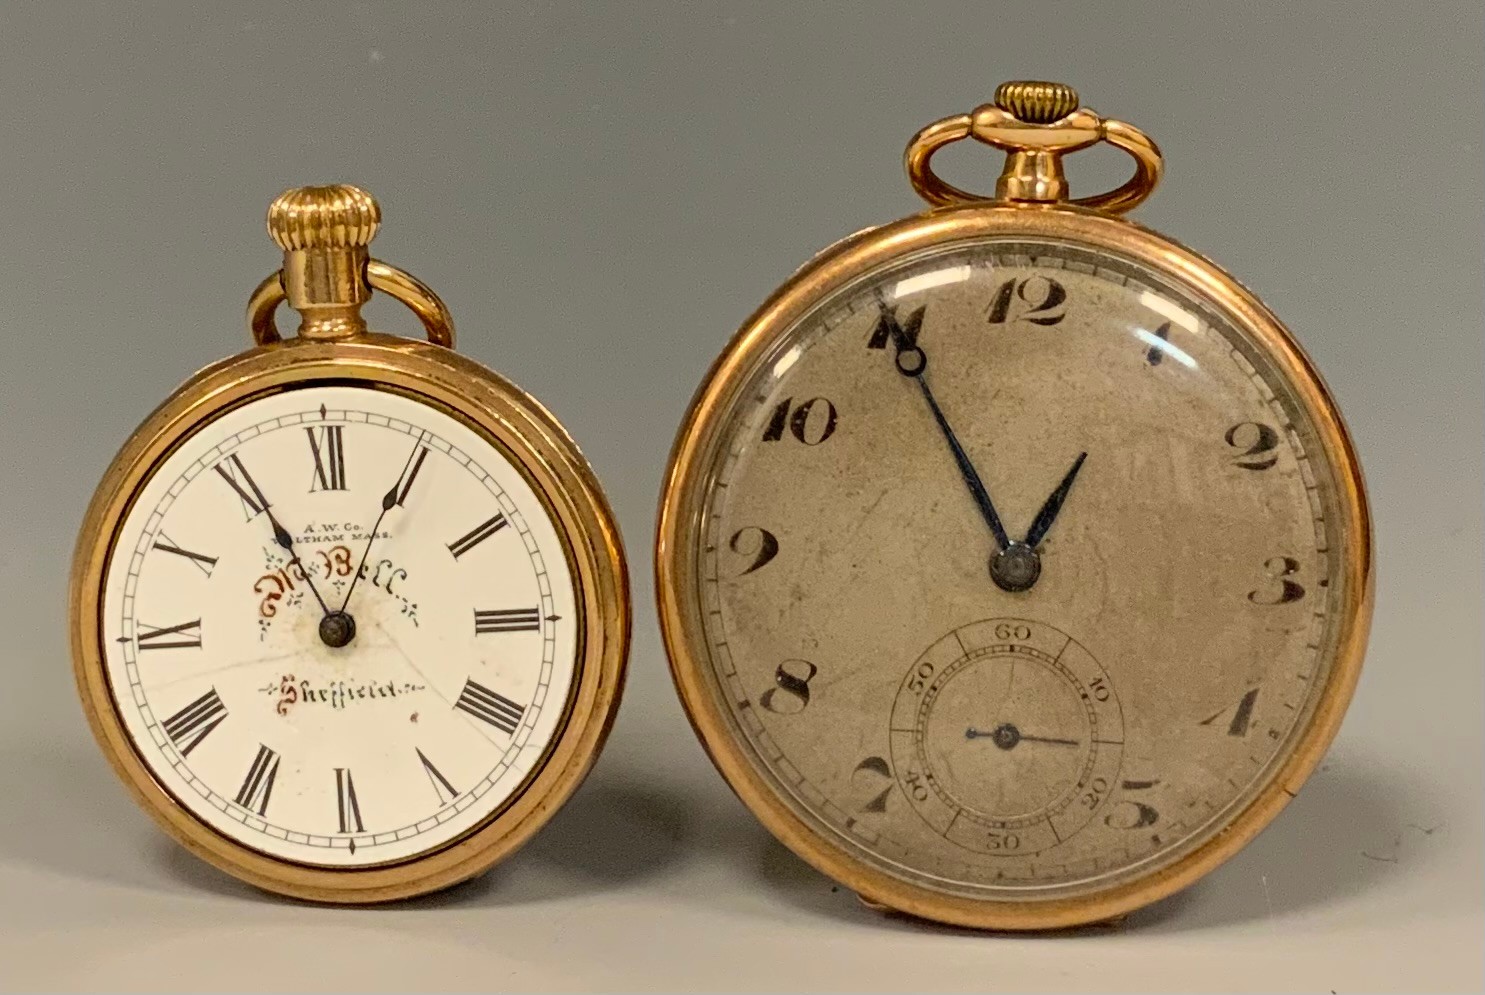 A 9ct rose gold open face pocket watch, silver dial, Arabic numerals, subsidiary seconds, stem